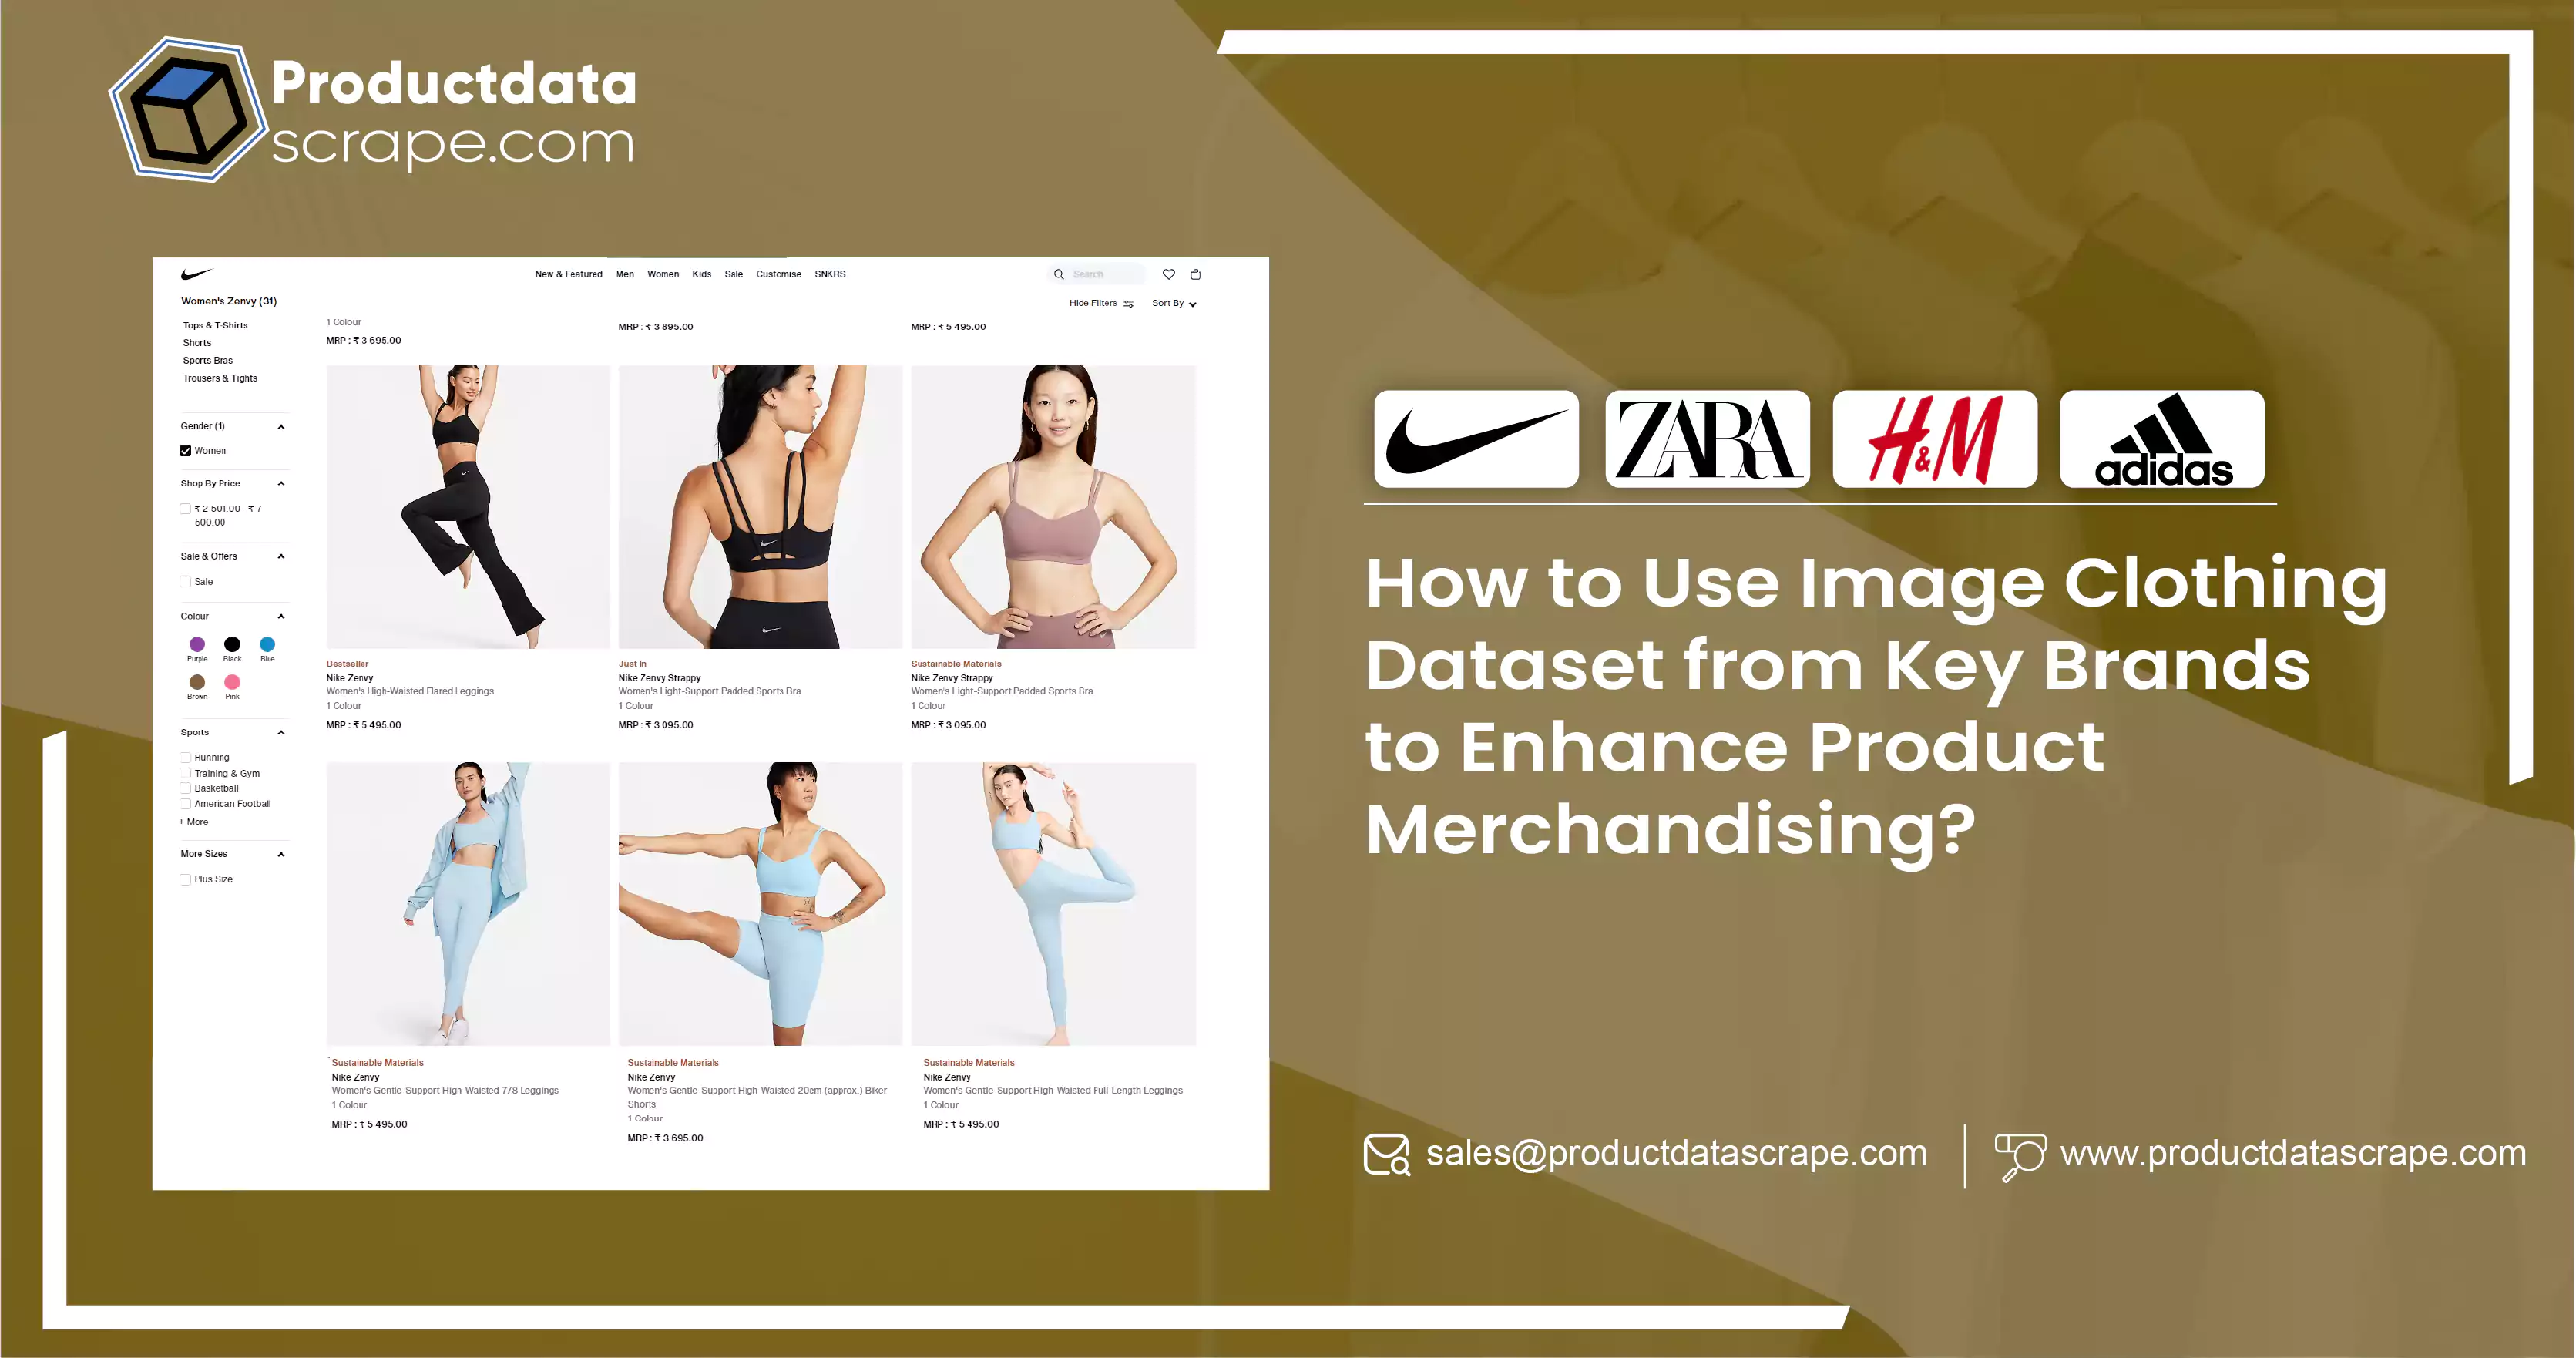 How to Use Image Clothing Dataset from Key Brands to Enhance Product Merchandising